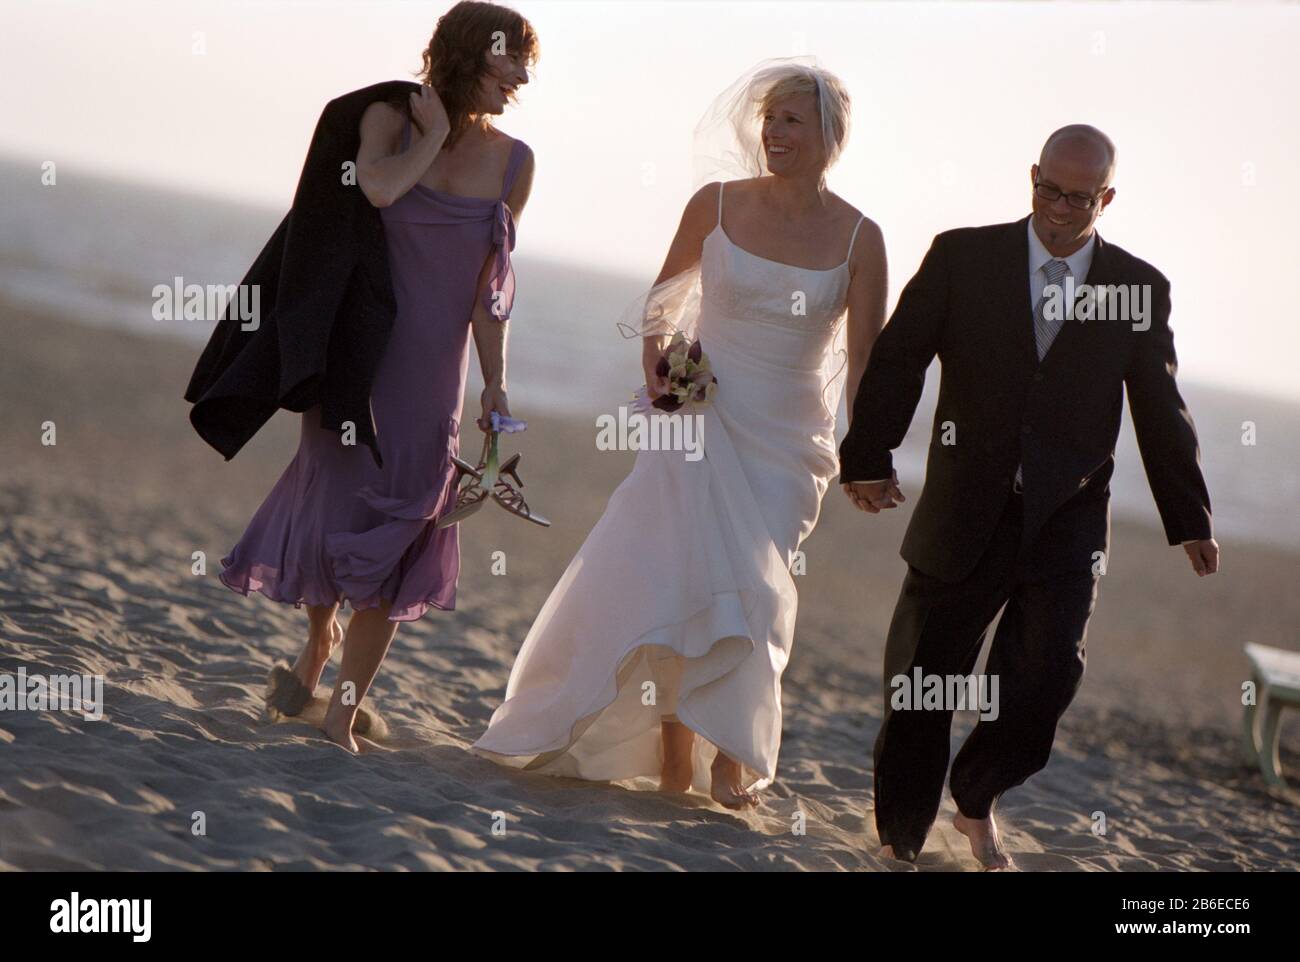 Smiling bride and groom walking along a sandy beach with one of their bridesmaids. Stock Photo